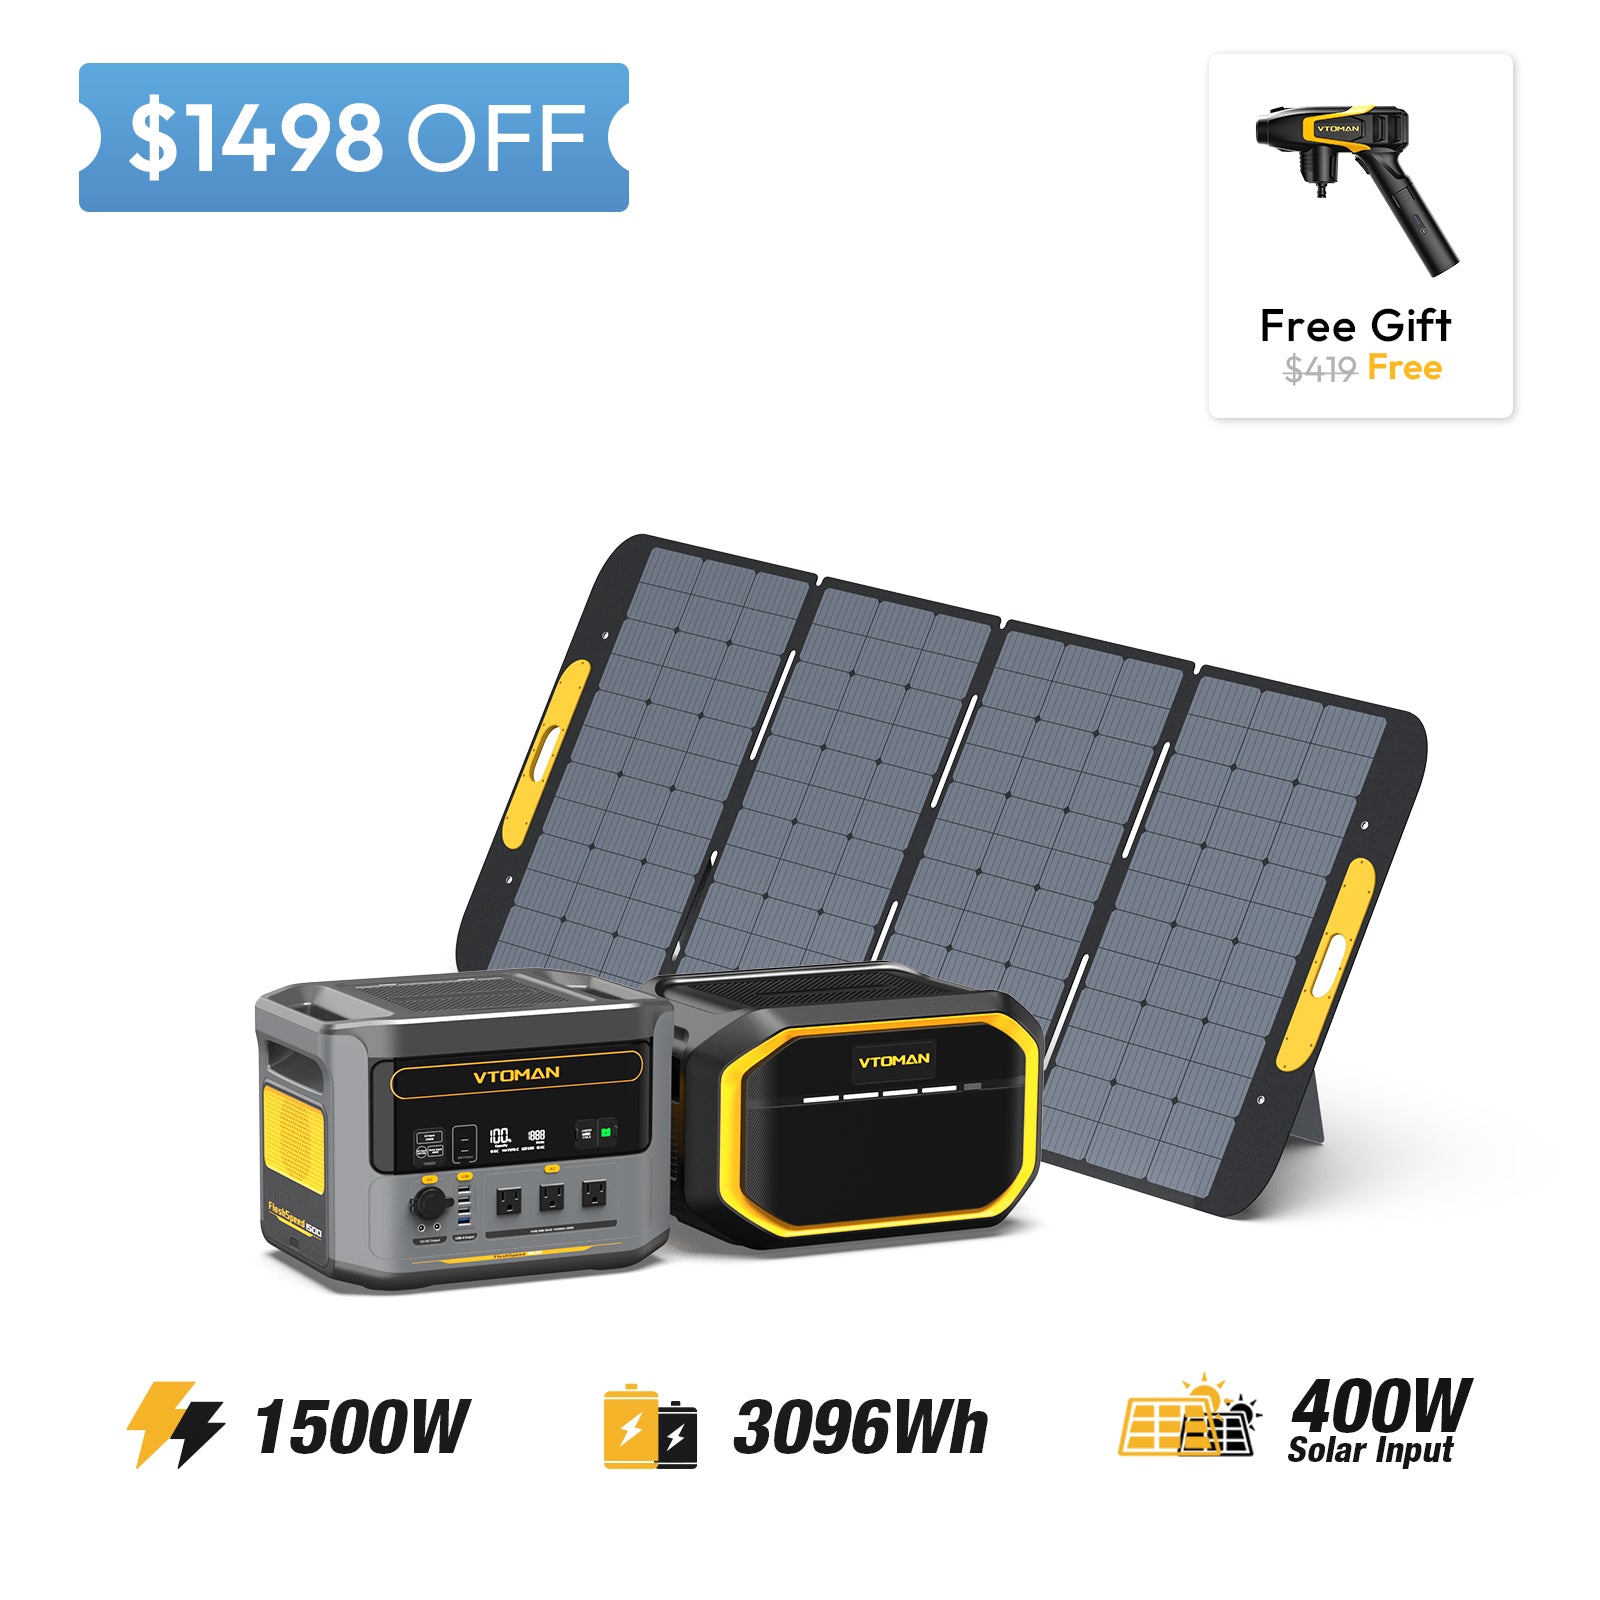 FlashSpeed 1500 and 1548wh extra battery and 400w solar panel save $1498 in summer sale